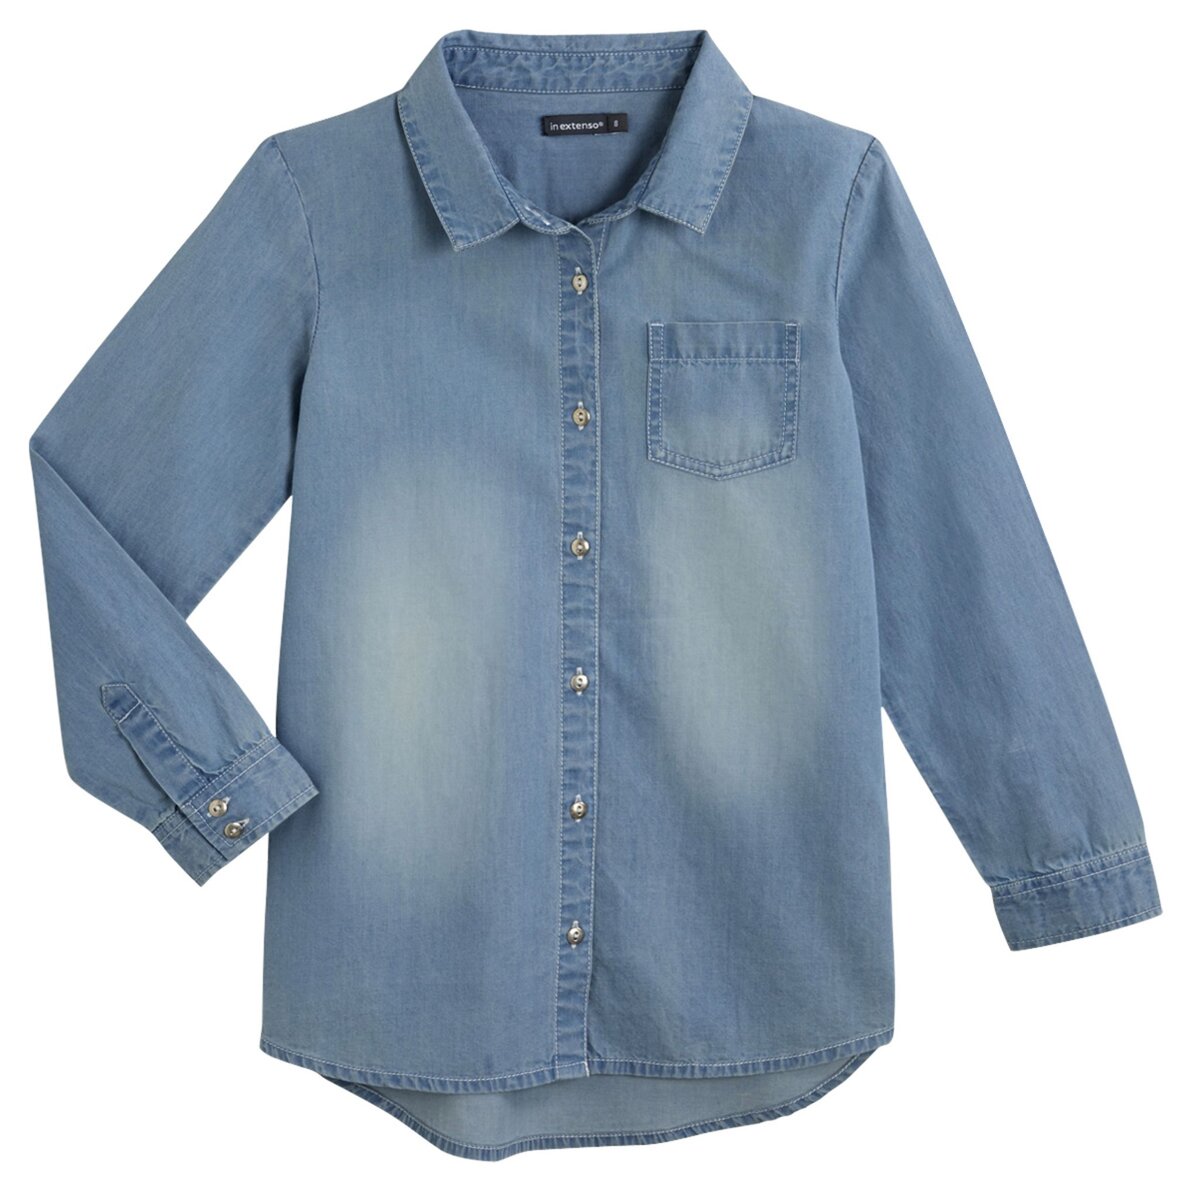 IN EXTENSO Chemise en jean manches longues fille